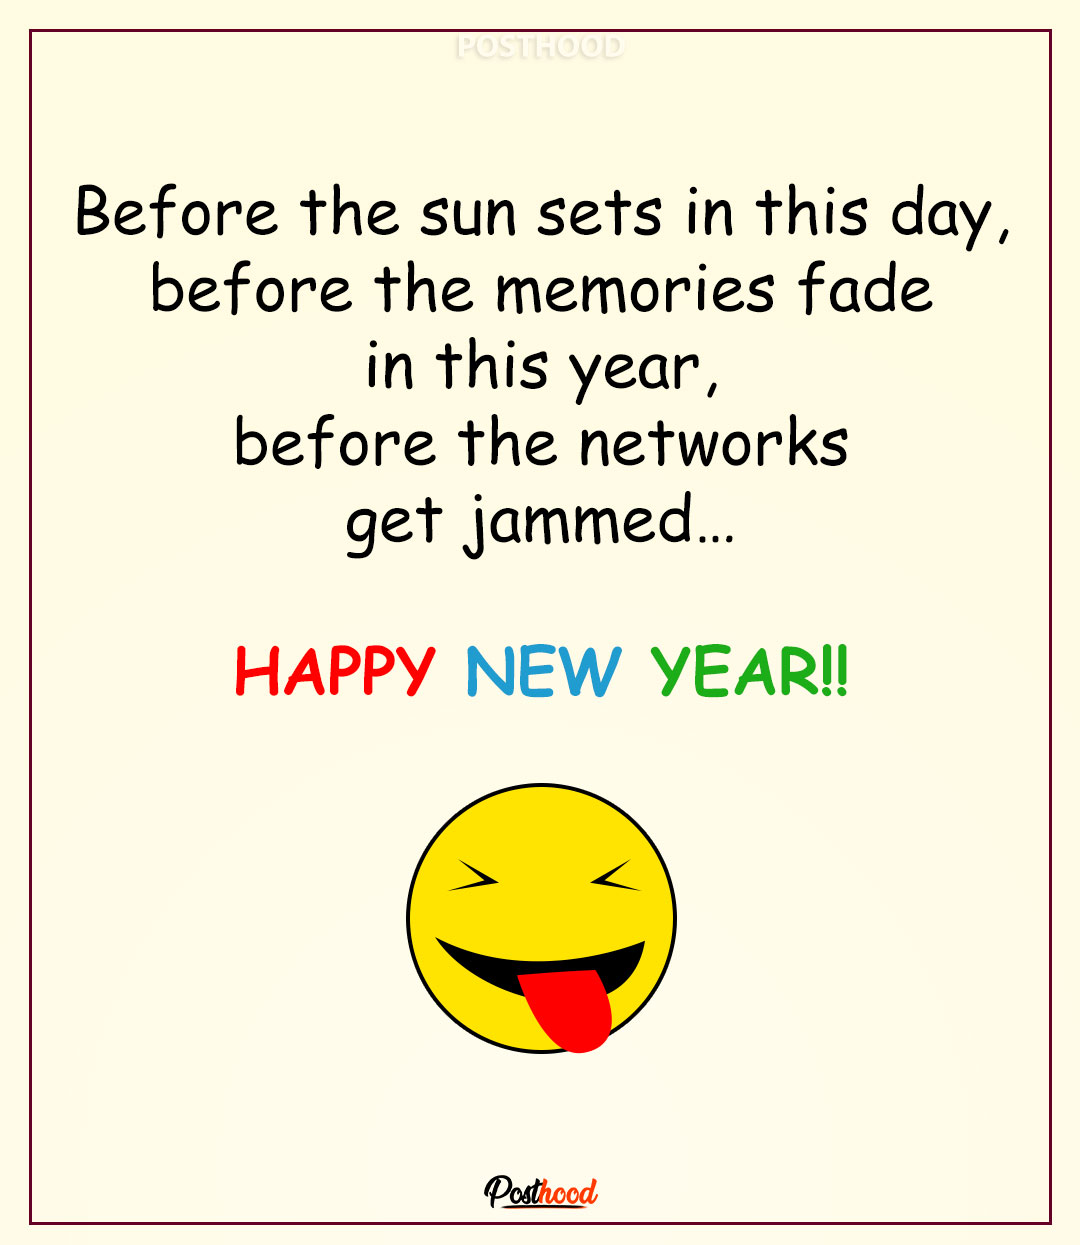 Funny New Year wishes for friends and family before the network get jammed. Find 20 more funny New Year messages. 